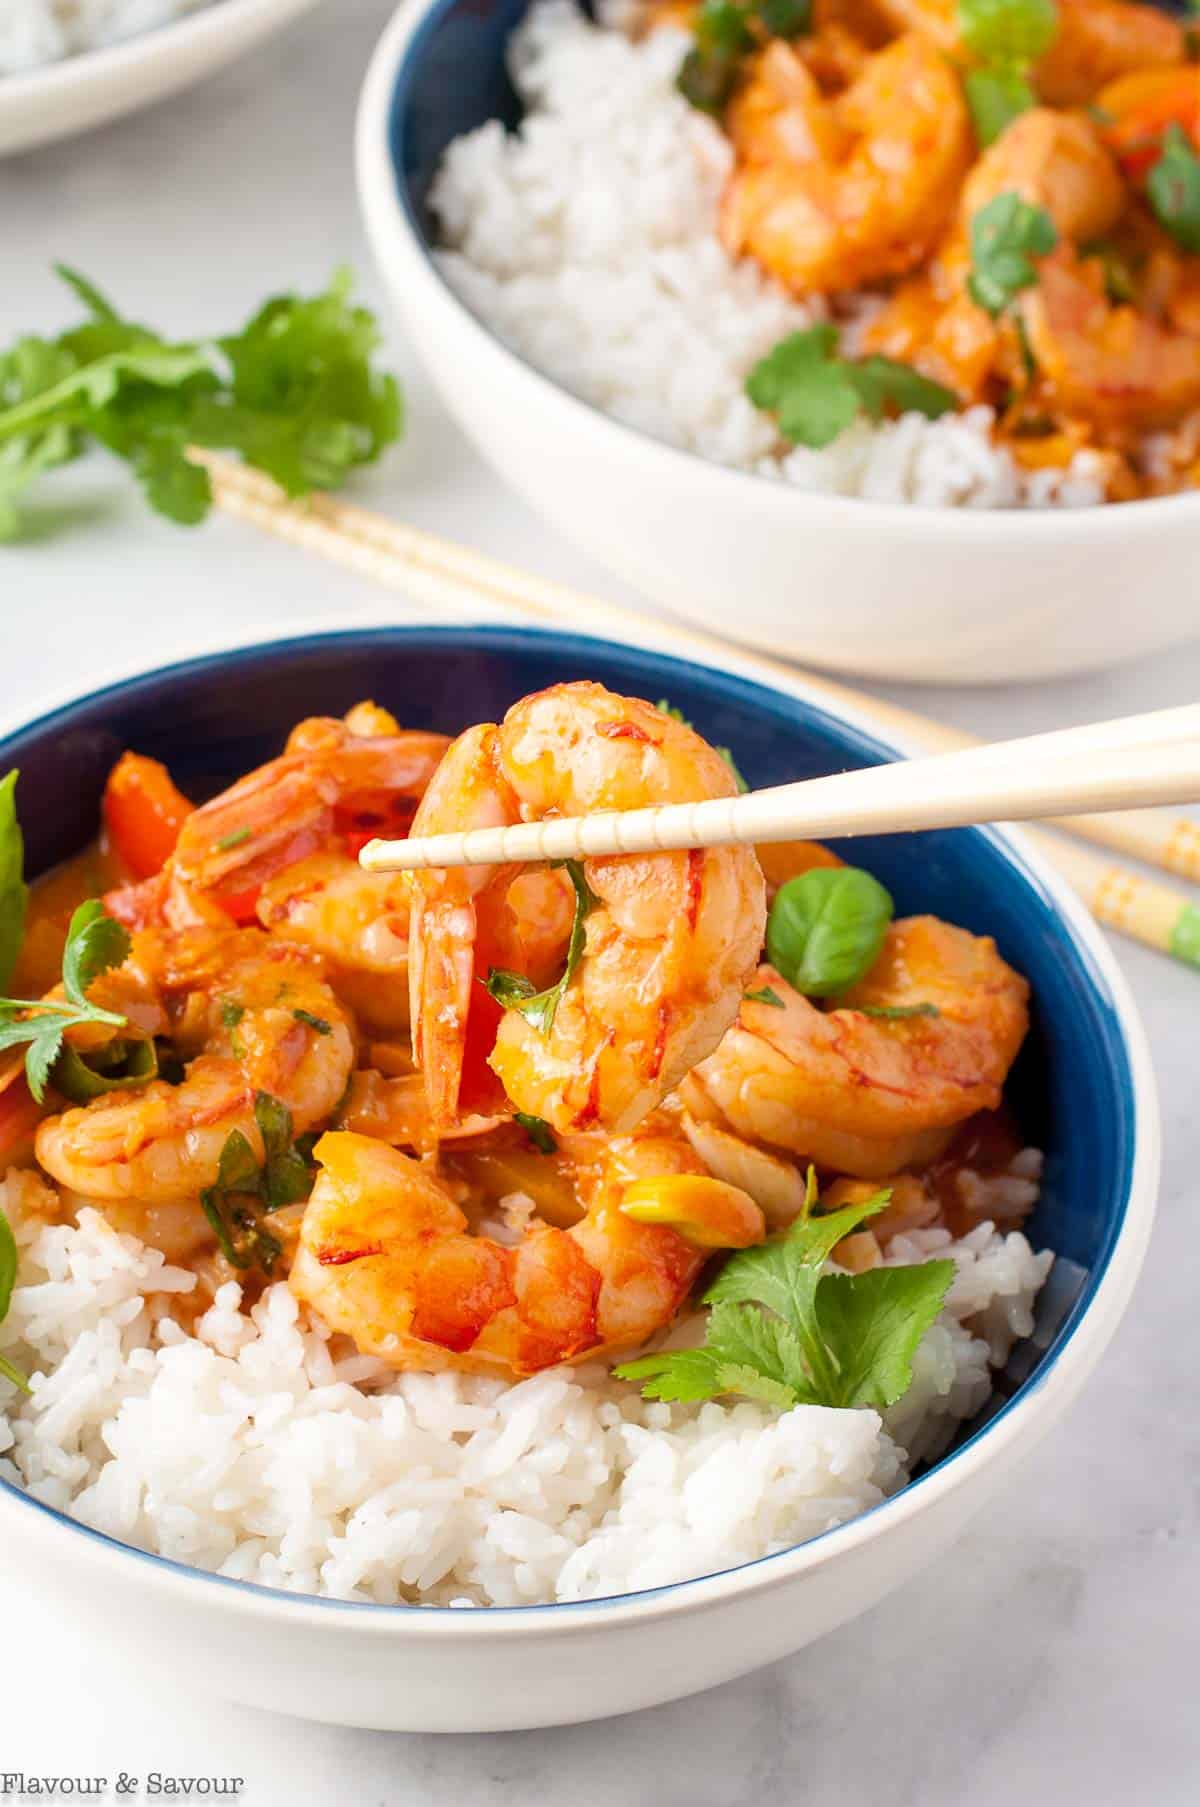 Thai red curry with shrimp lifted up with chopsticks.